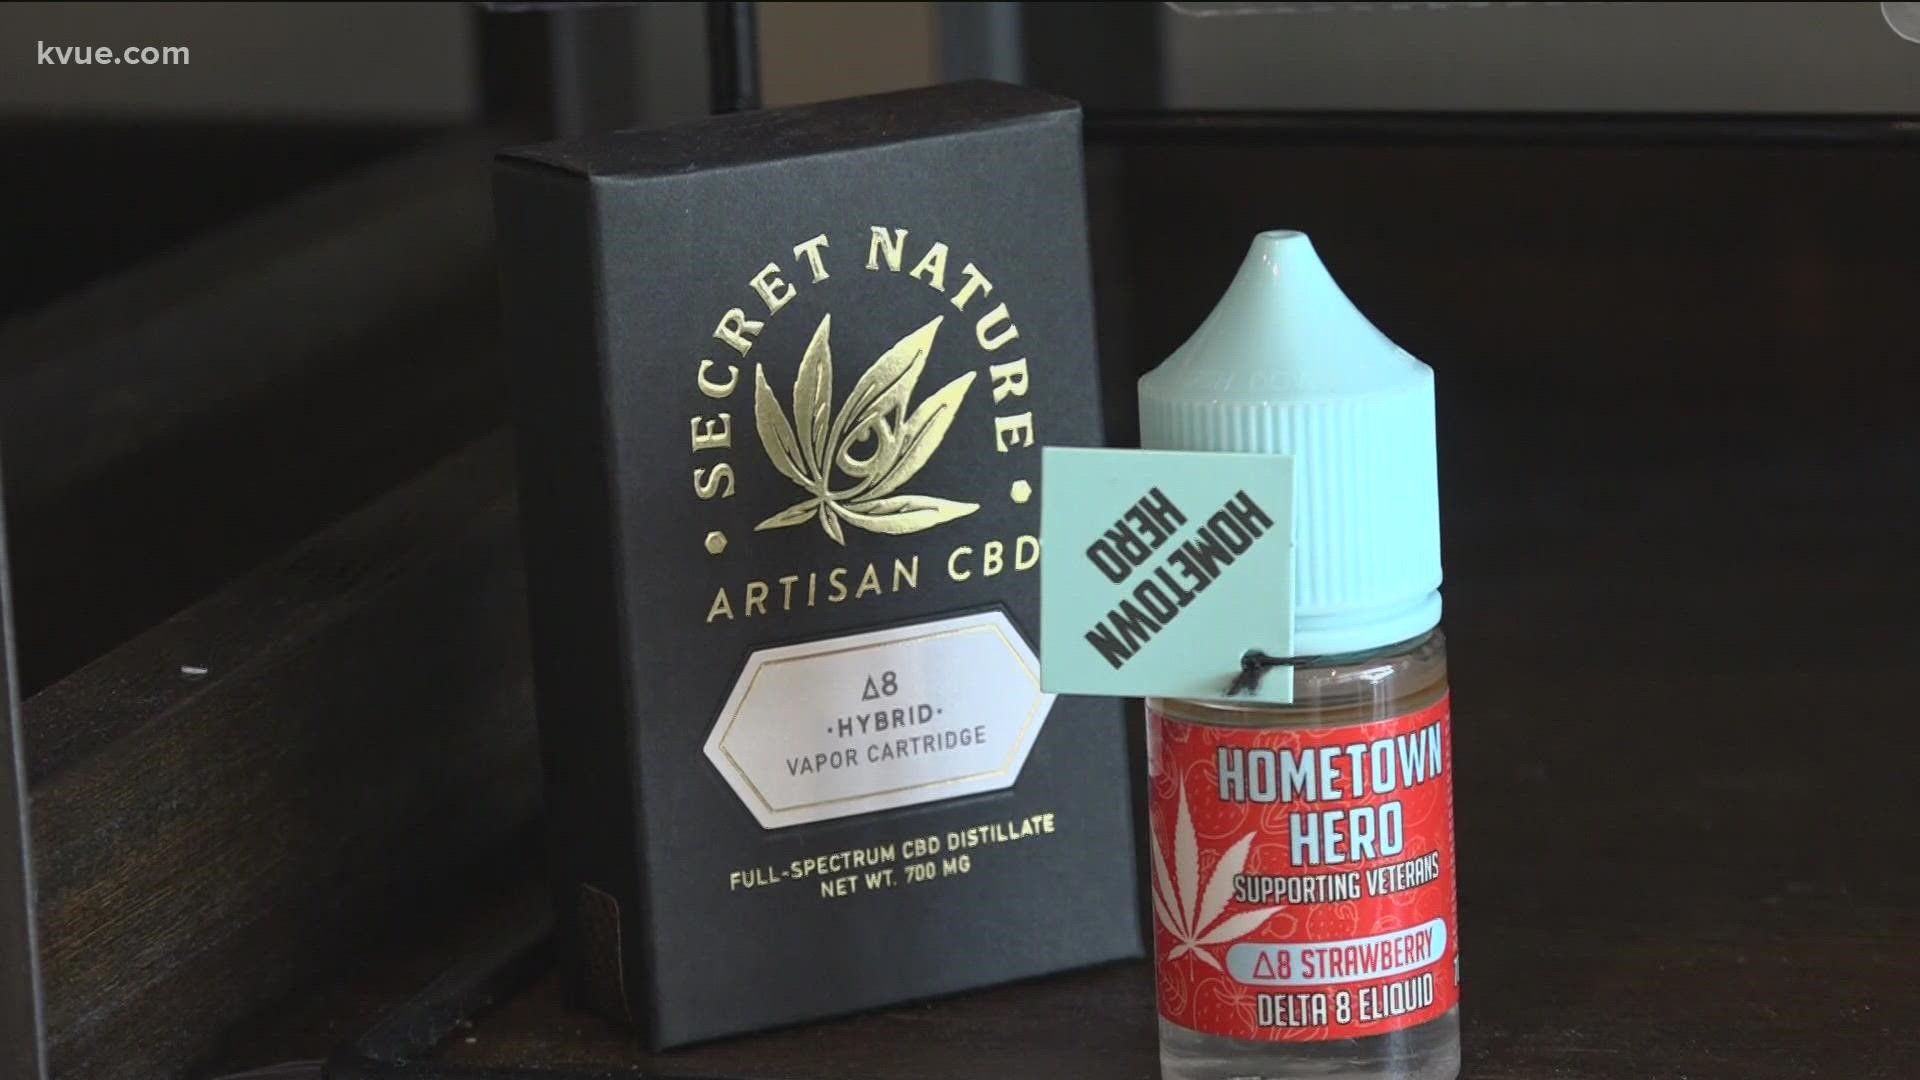 An update from the Texas Department of Health Services says delta-8 THC is illegal in Texas. That's confusing business owners who have been selling it.